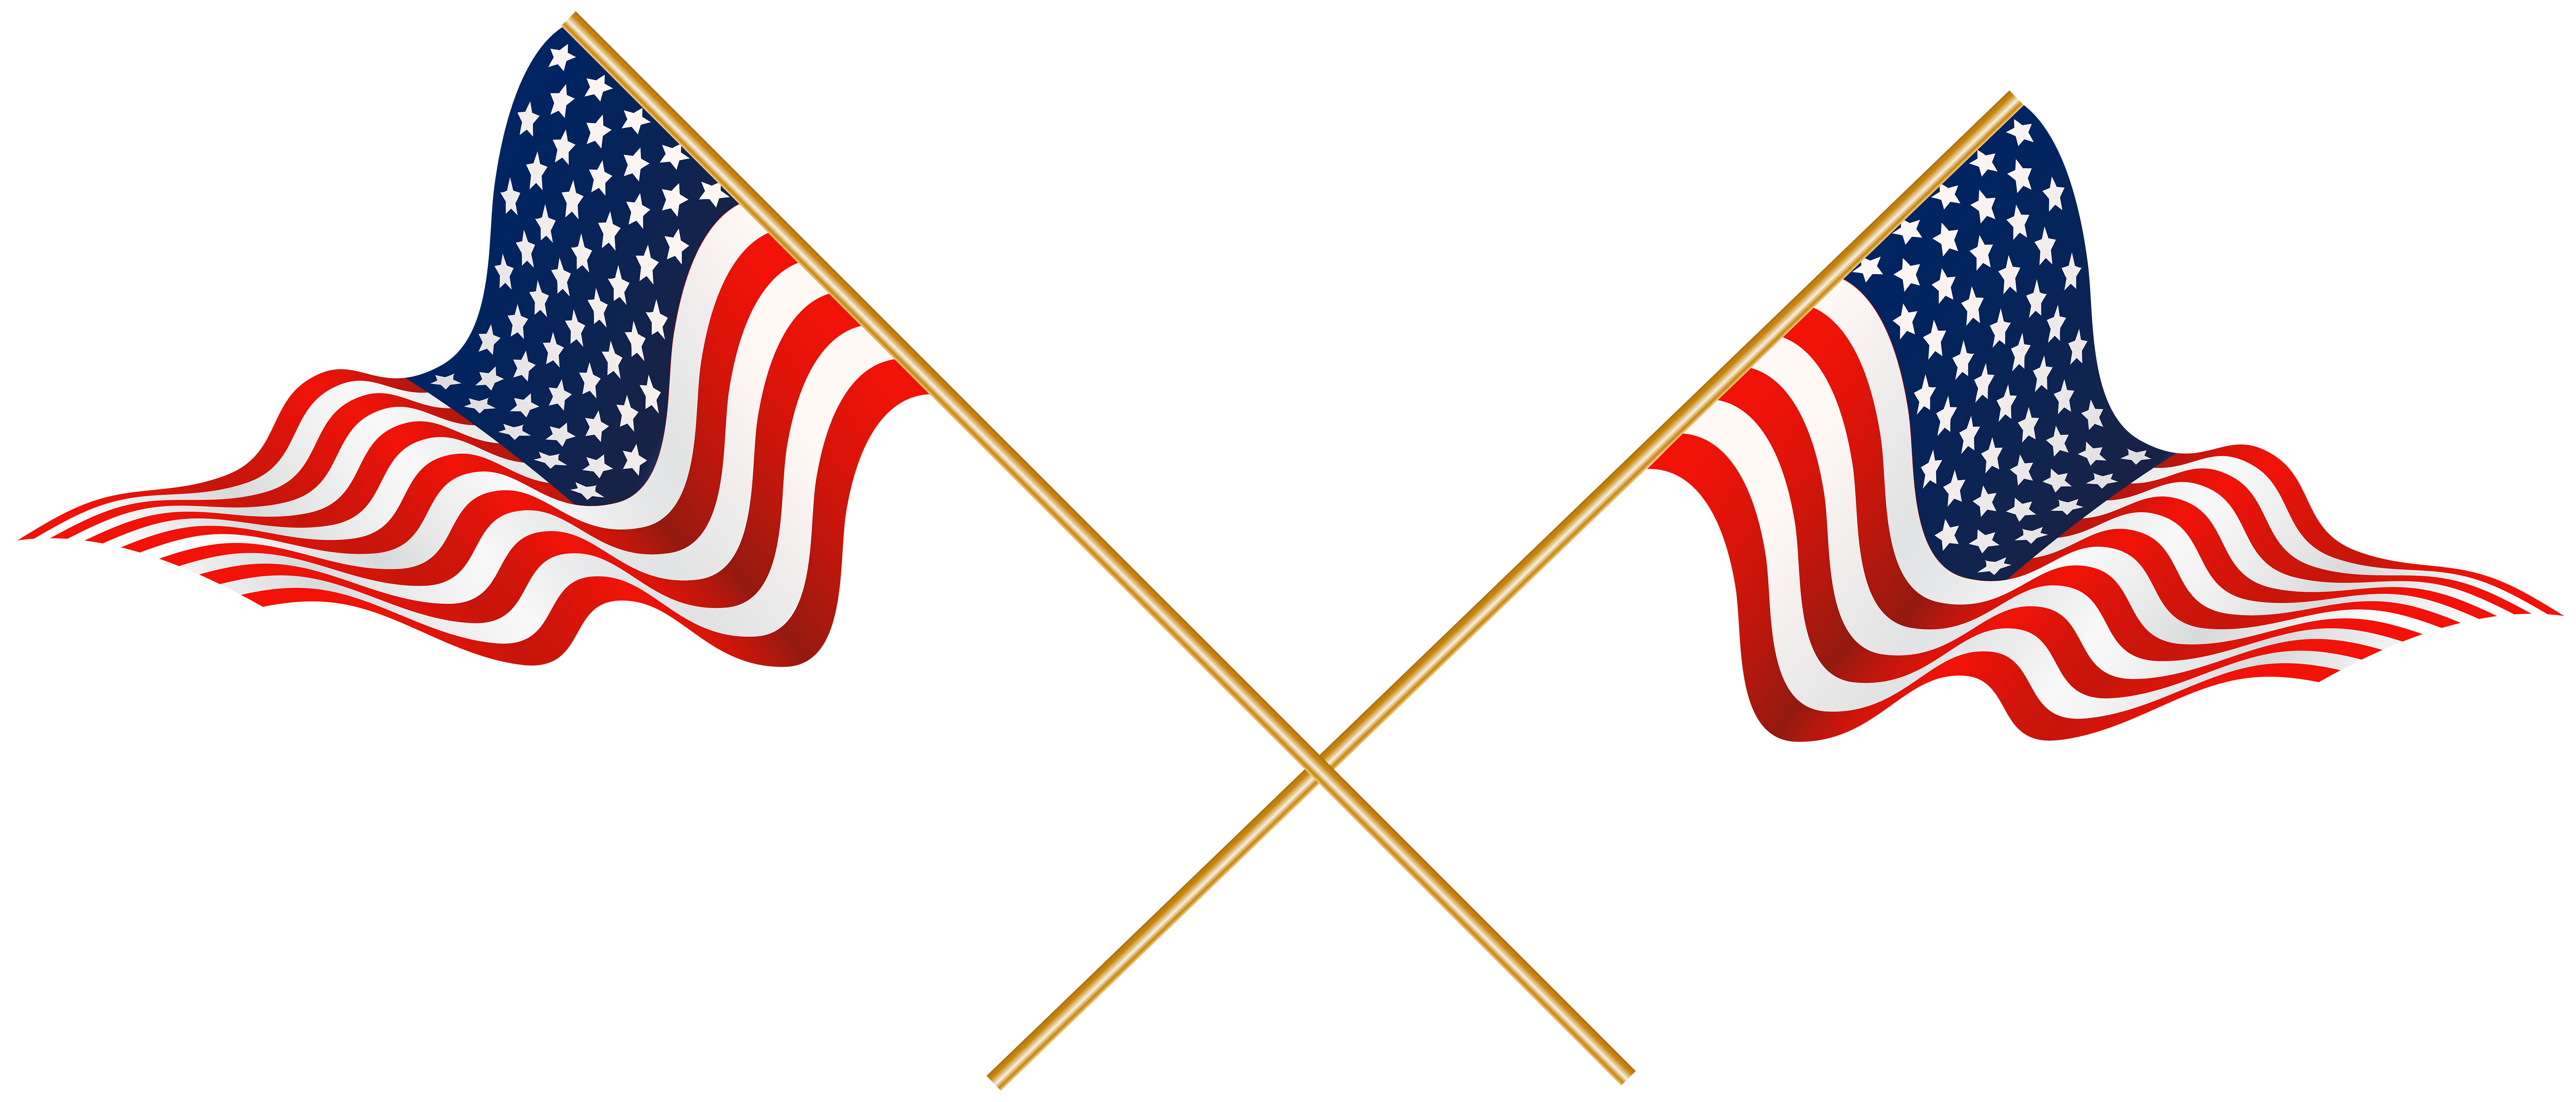 United Usa Of Cross States Flag Crossed Clipart